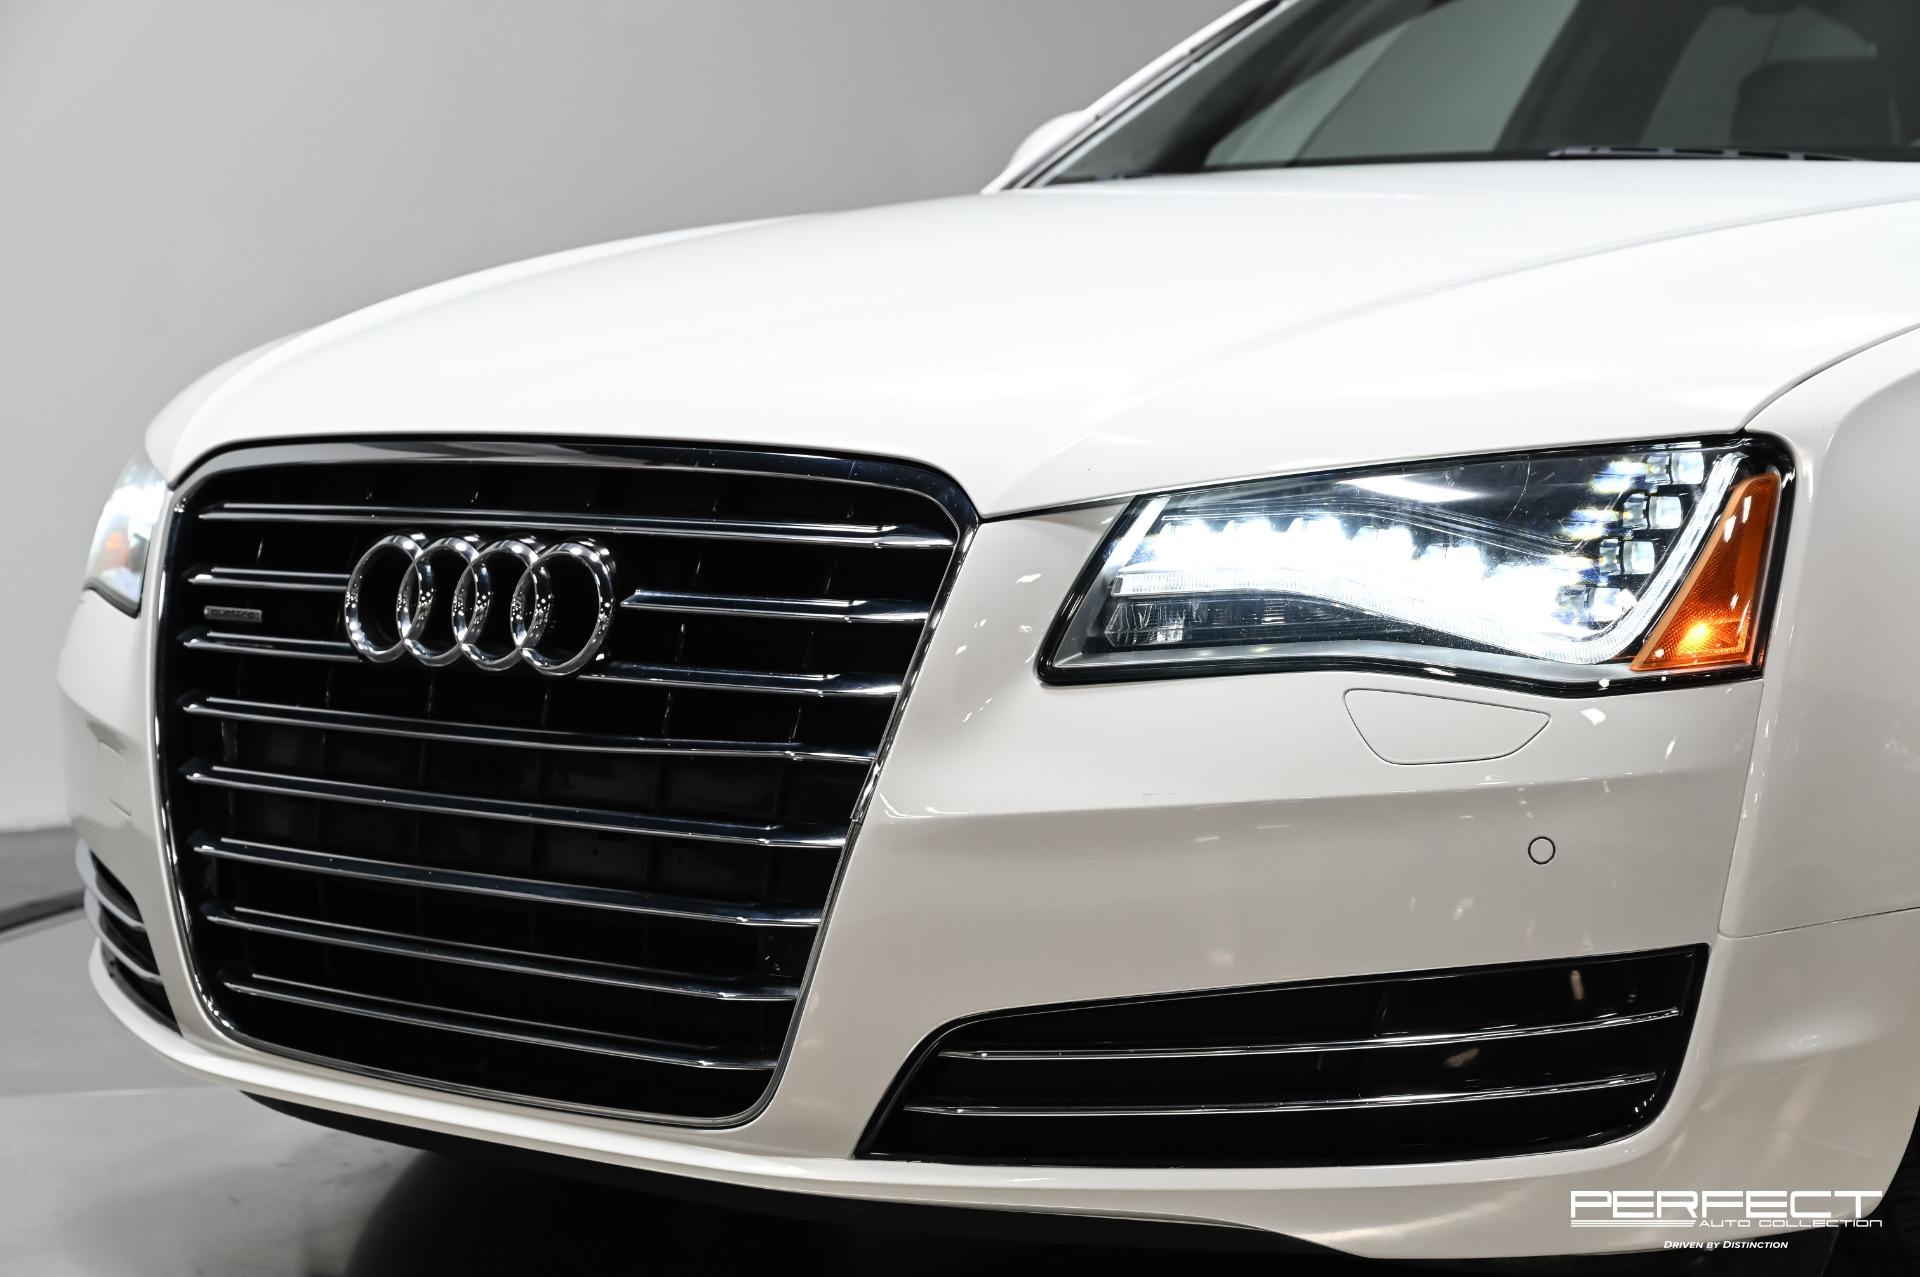 Used 2011 Audi A8 L 4.2 For Sale (Sold)  Perfect Auto Collection Stock  #BN018447